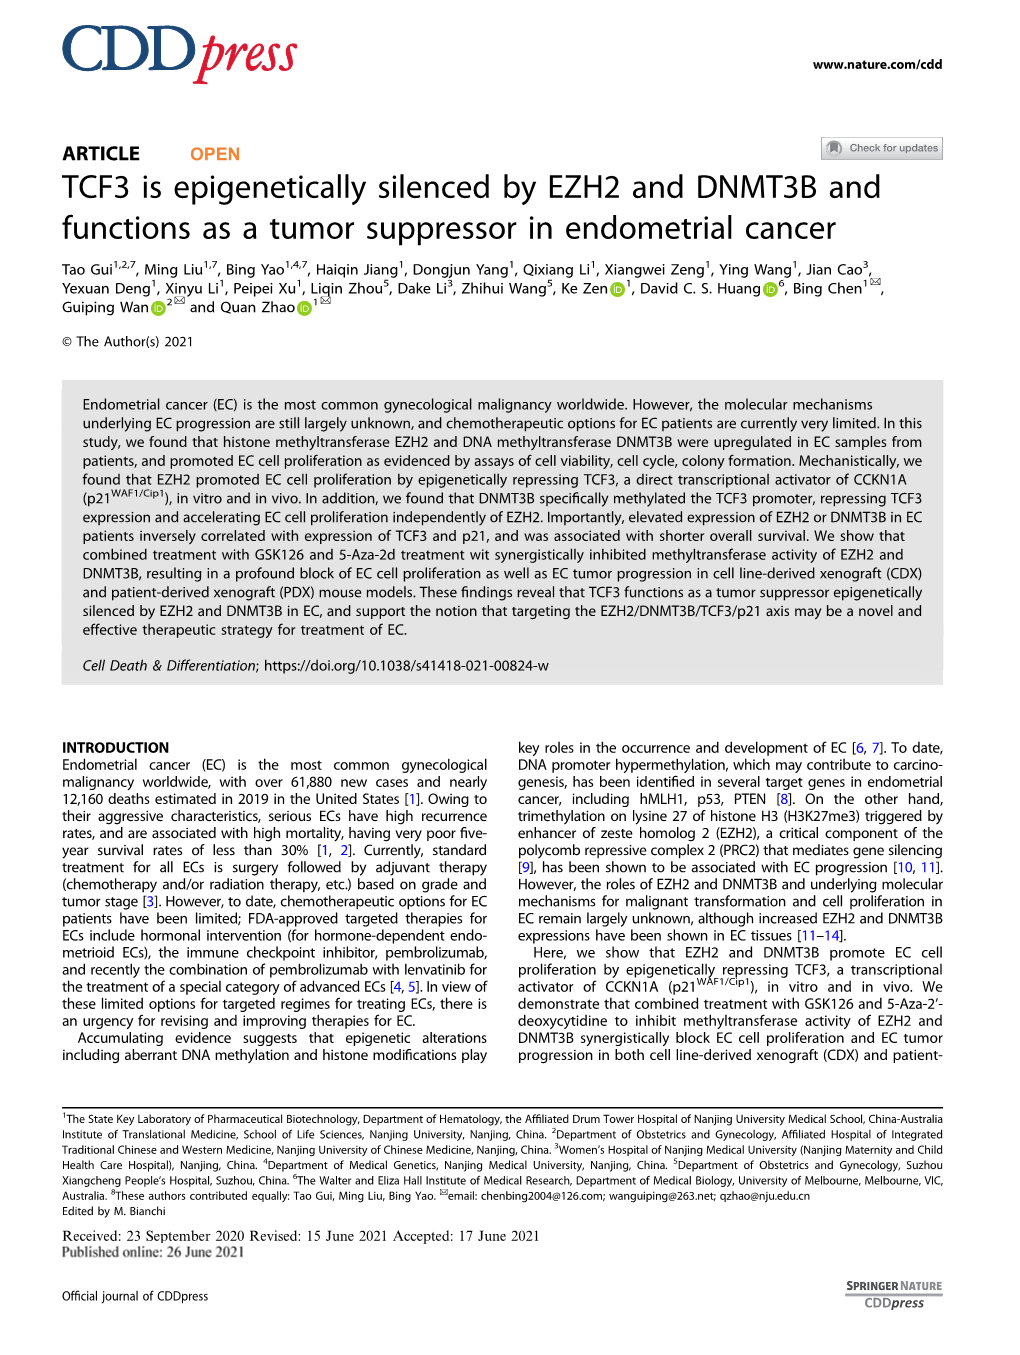 TCF3 Is Epigenetically Silenced by EZH2 and DNMT3B and Functions As a Tumor Suppressor in Endometrial Cancer